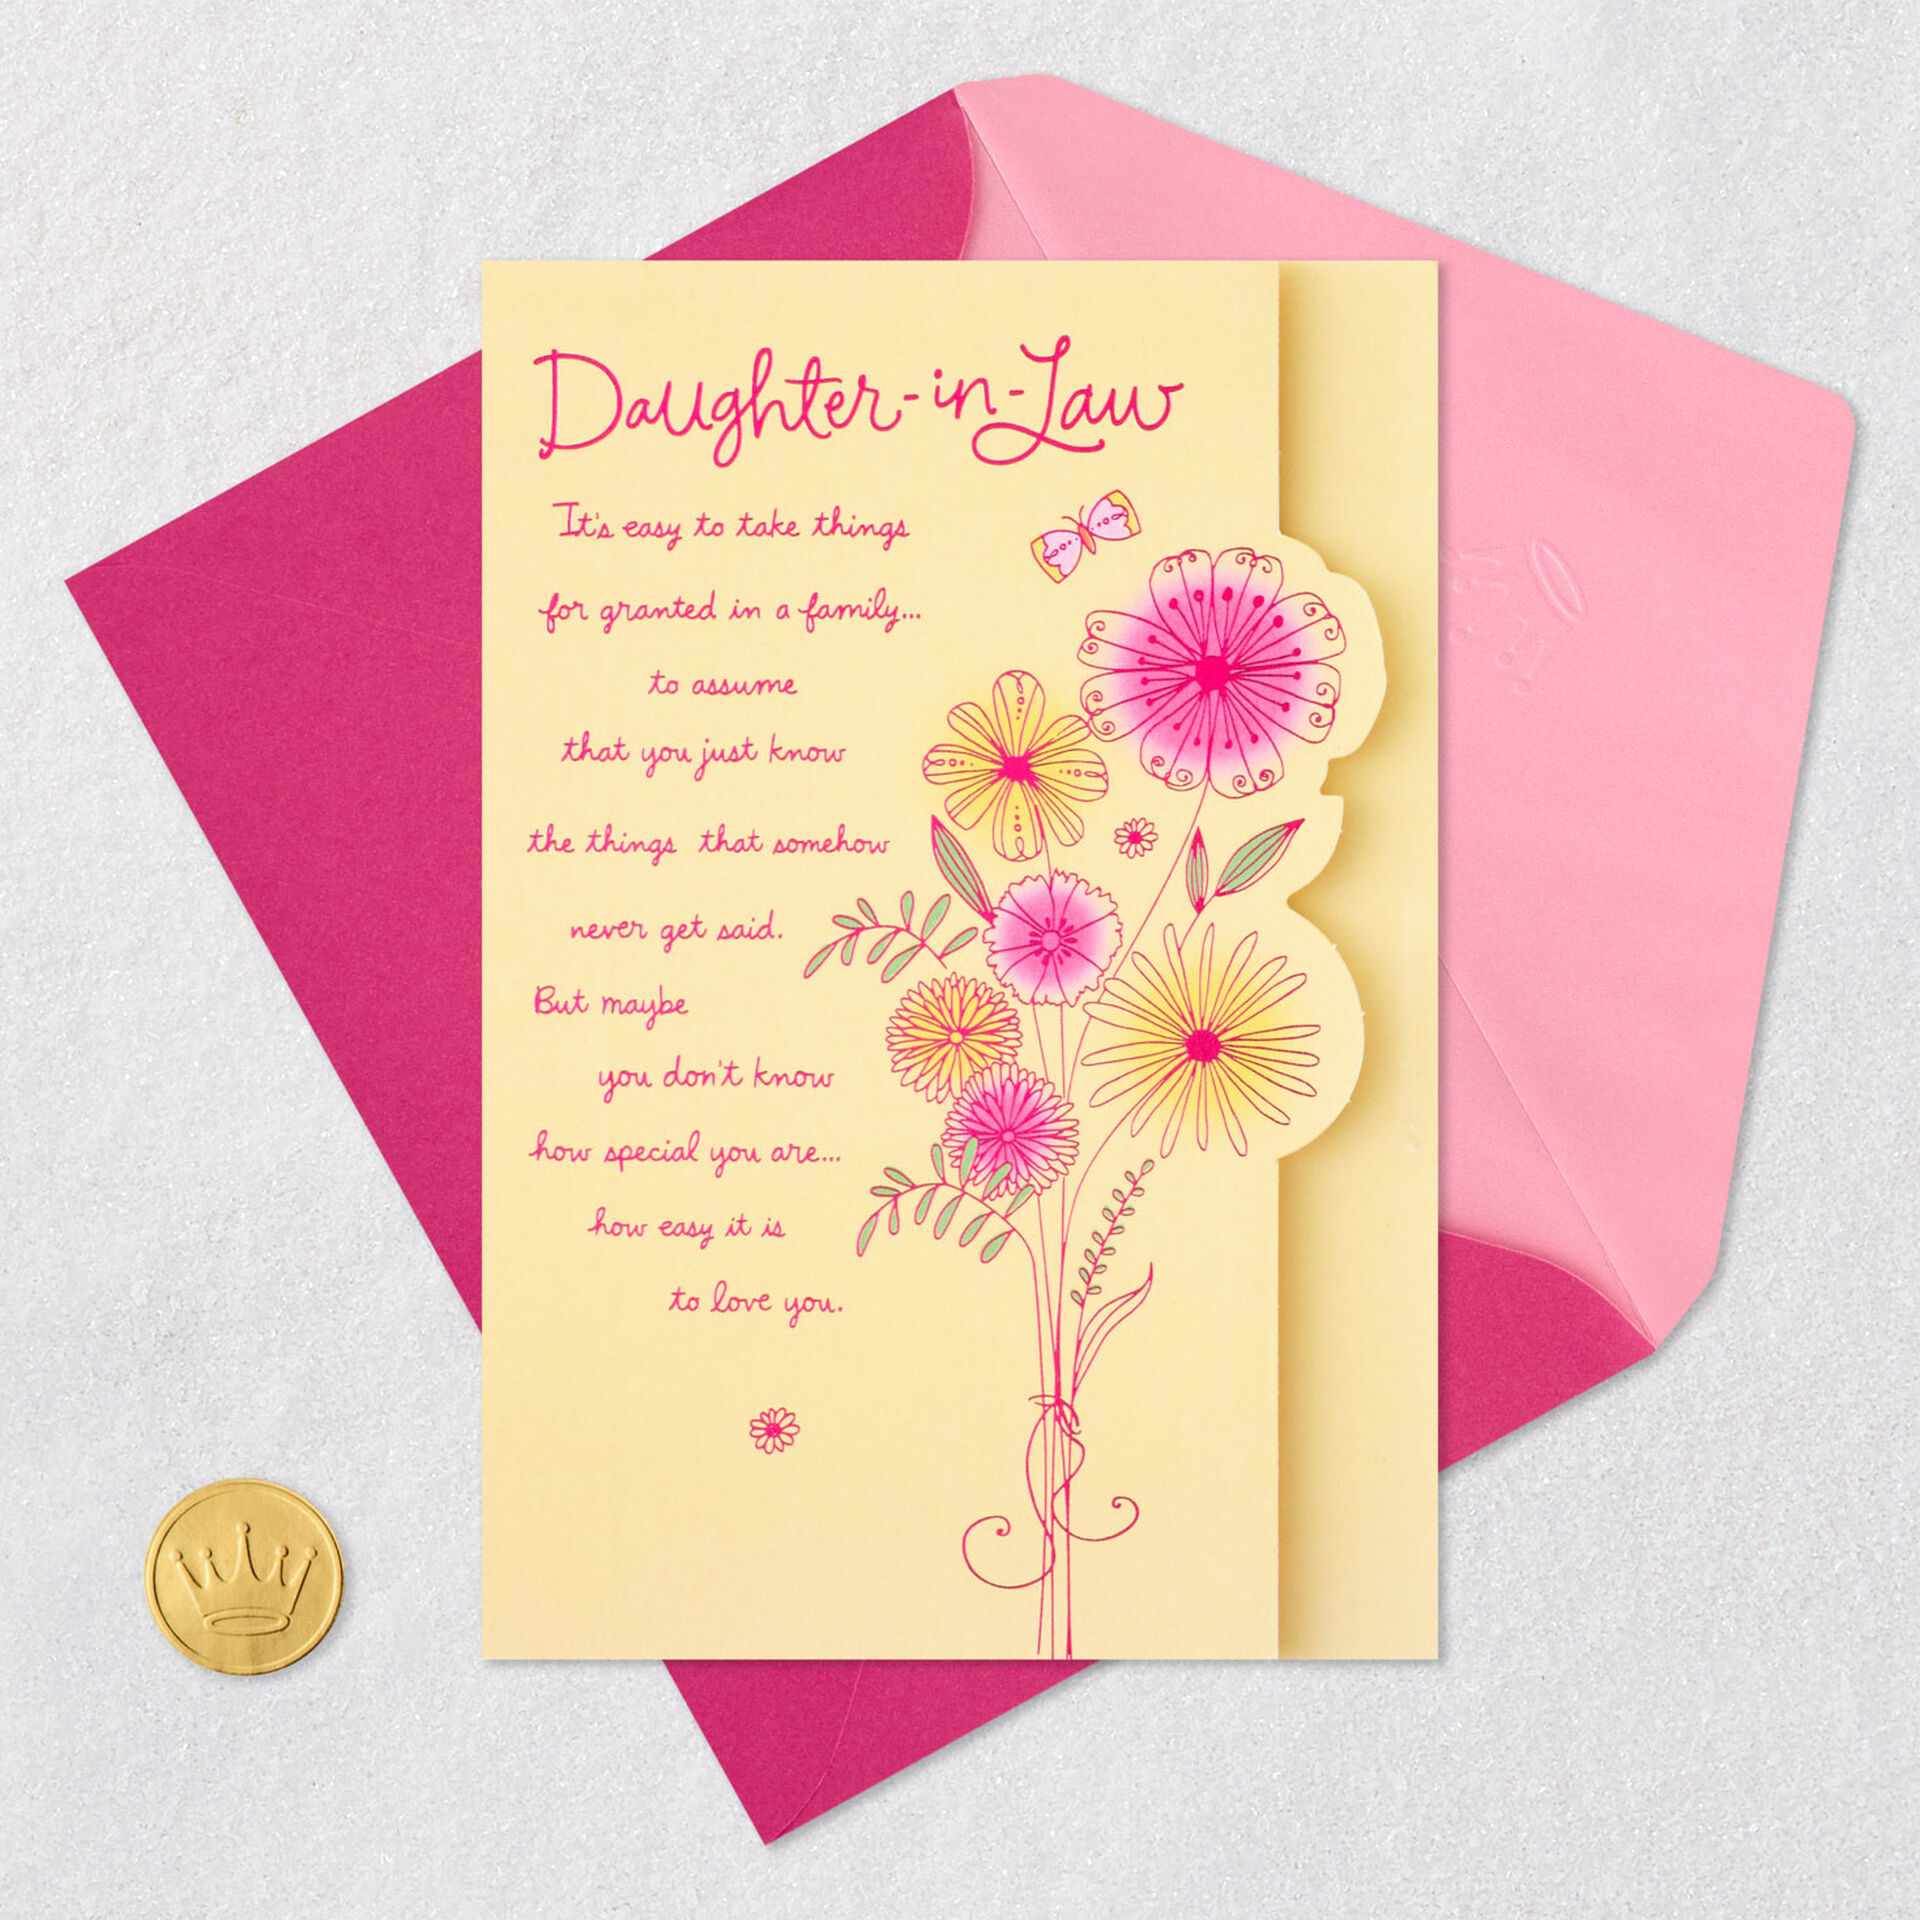 how-special-you-are-birthday-card-for-daughter-in-law-greeting-cards